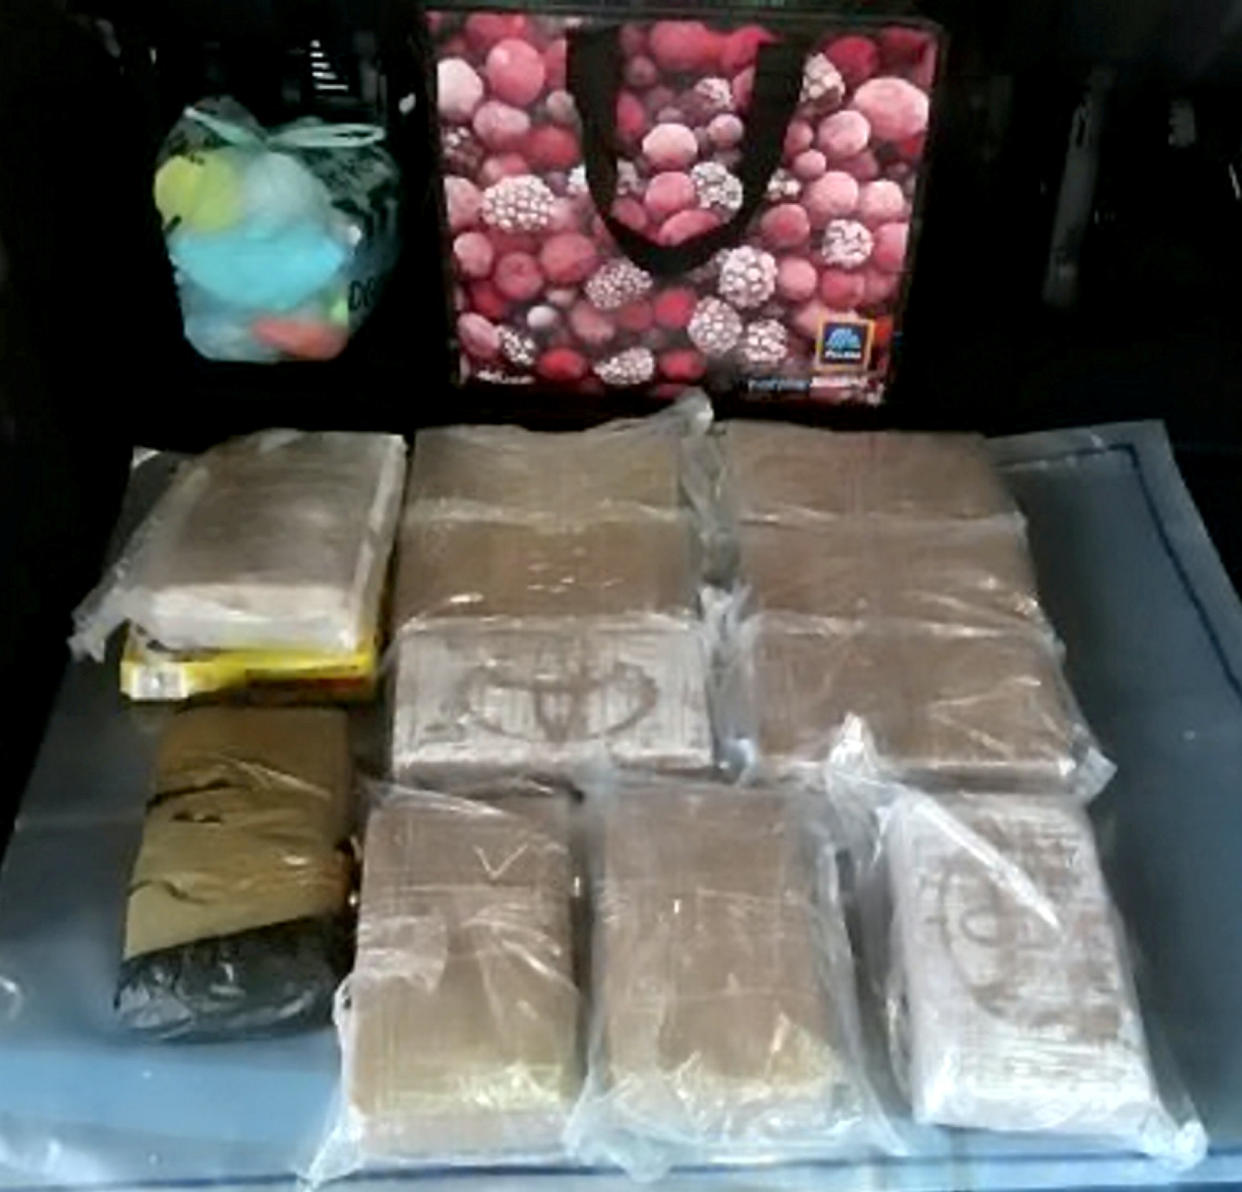 Drugs in Bakali's car.  A pair of Essex drug dealers who used encrypted messaging platform EncroChat to run their criminal enterprise have been jailed for more than 25 years.  See SWNS story SWMRkrays.  Officers from the Organised Crime Partnership – a joint National Crime Agency and Metropolitan Police Service unit – identified supplies of around 80 kilos of cocaine as part of their investigation into  Robert Smith, 37, and Ismet Salih, 33, both from Grays in Essex.  The men were also linked to the seizures of a further 123 kilos of cocaine, and had laundered profits of more than £1.25 million in cash.  Smith headed an organised crime group which supplied cocaine and cannabis to the Chadwell St Mary and Grays areas, and used Salih and Lee Twigg as his trusted seconds in command.  Smith and Salih referred to themselves as the ‘Chadwell Cartel’ in EncroChat exchanges, and messages exchanged revealed their aspirations of becoming gangsters like Ronnie and Reggie Kray. 